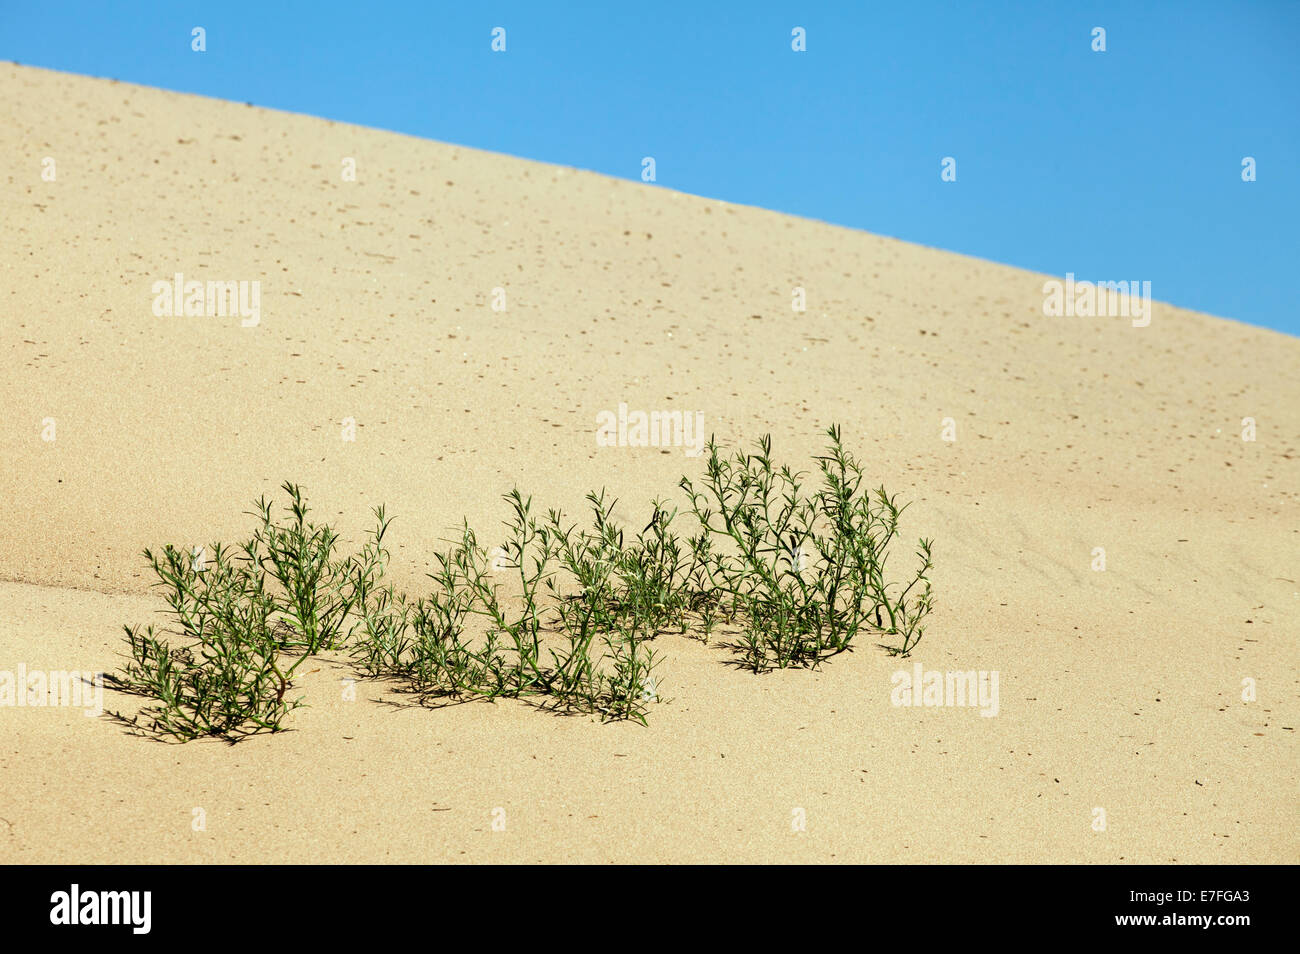 Plants growing in the sand adapted to the hot climate Stock Photo